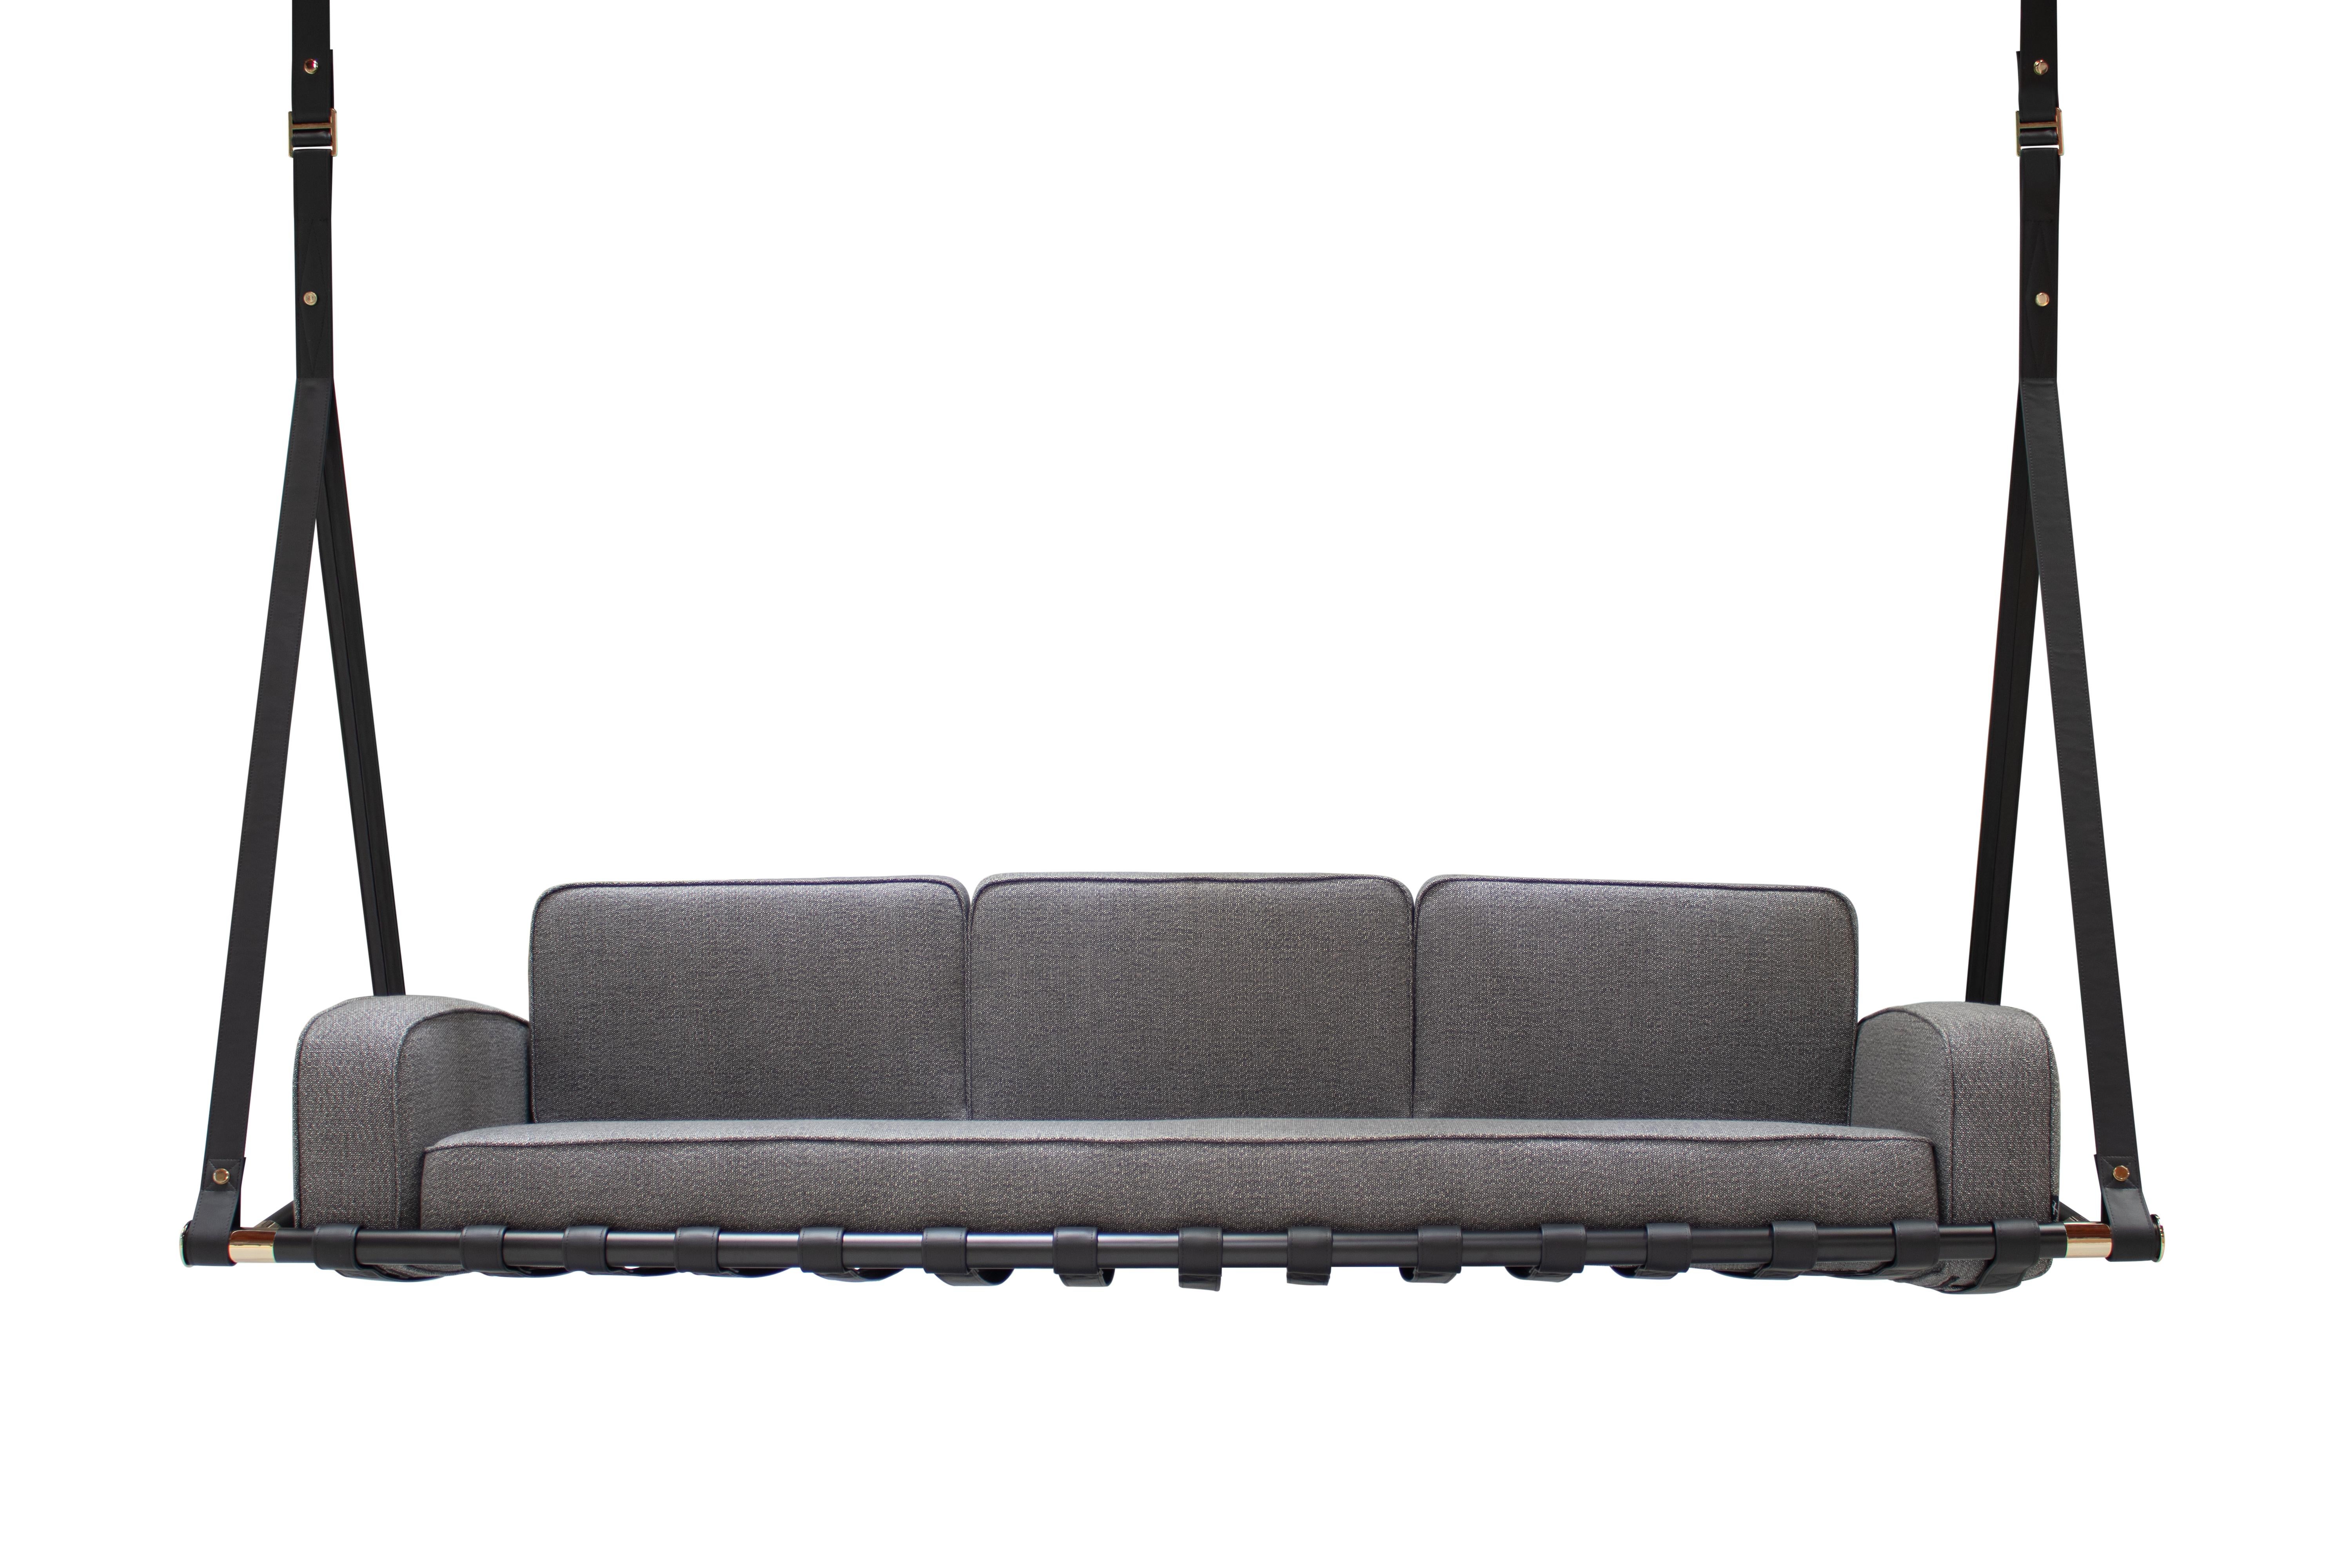 Fable hanging outdoor sofa 3 seater 

Hold by premium outdoor leather straps and with the addition of one seat, this inviting hanging sofa will allow quality outdoor moments without any concerns.

The whole design of this contemporary outdoor